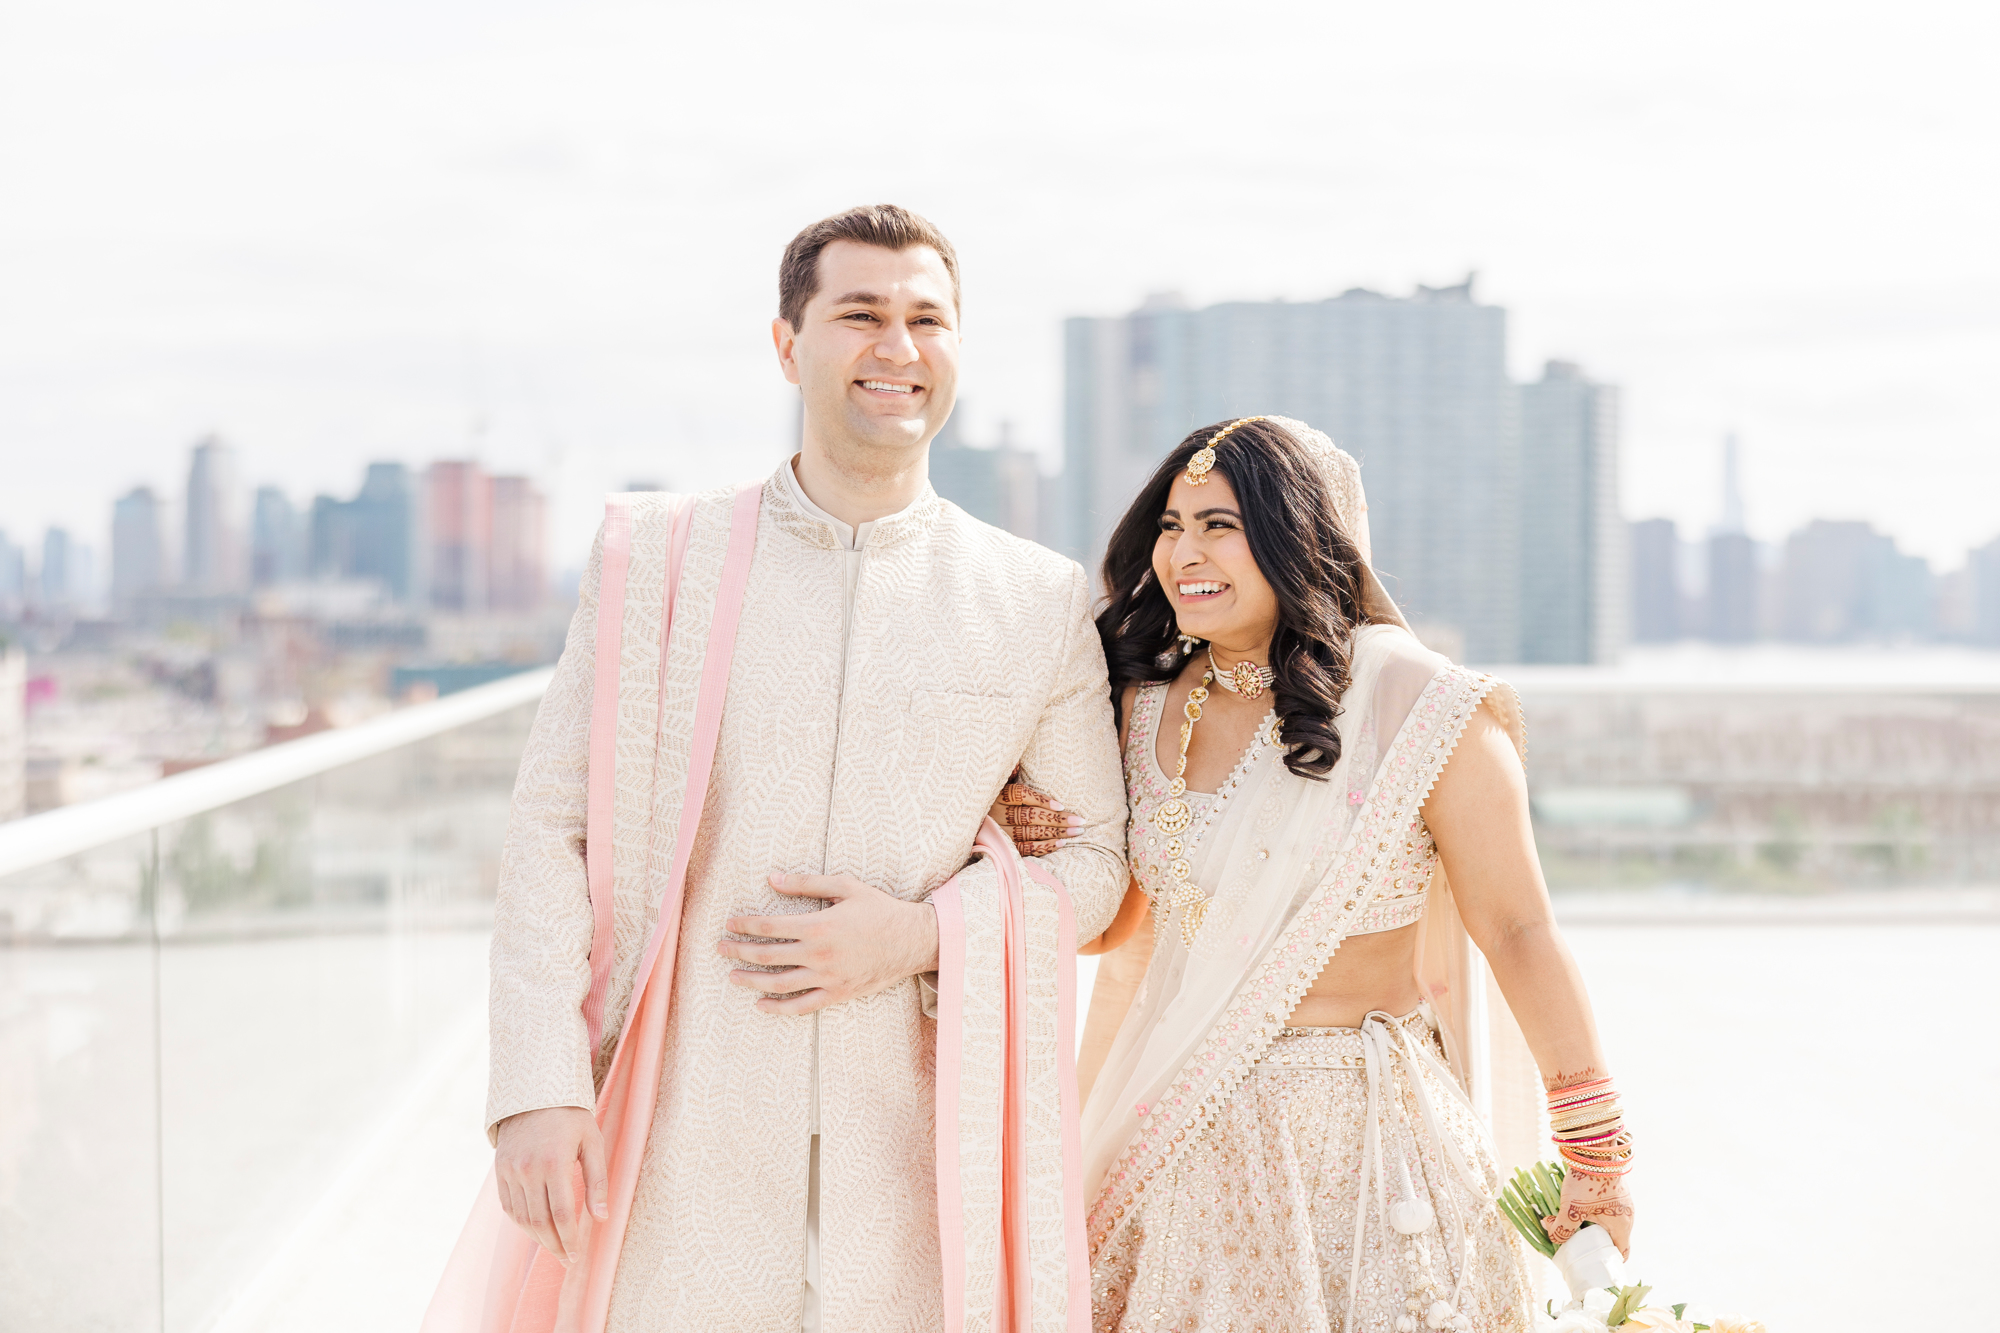 Personal Ravel Hotel Wedding in a Peachy, Pastel Palette